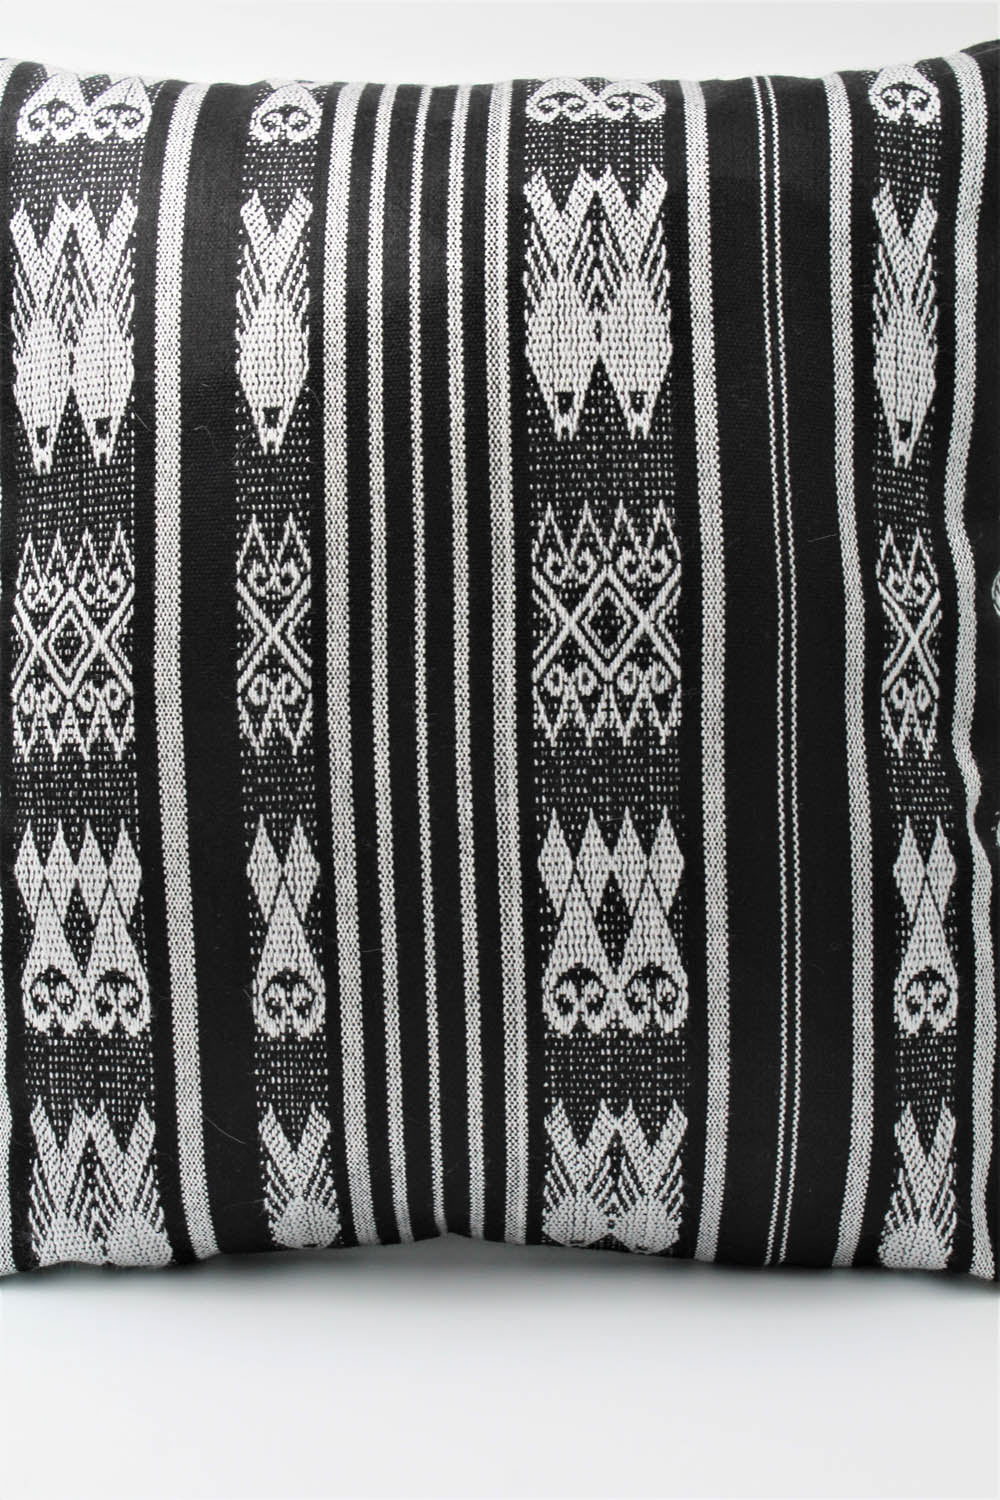 El Mar Pillow Collection: Black and White Fish with Black Tassels